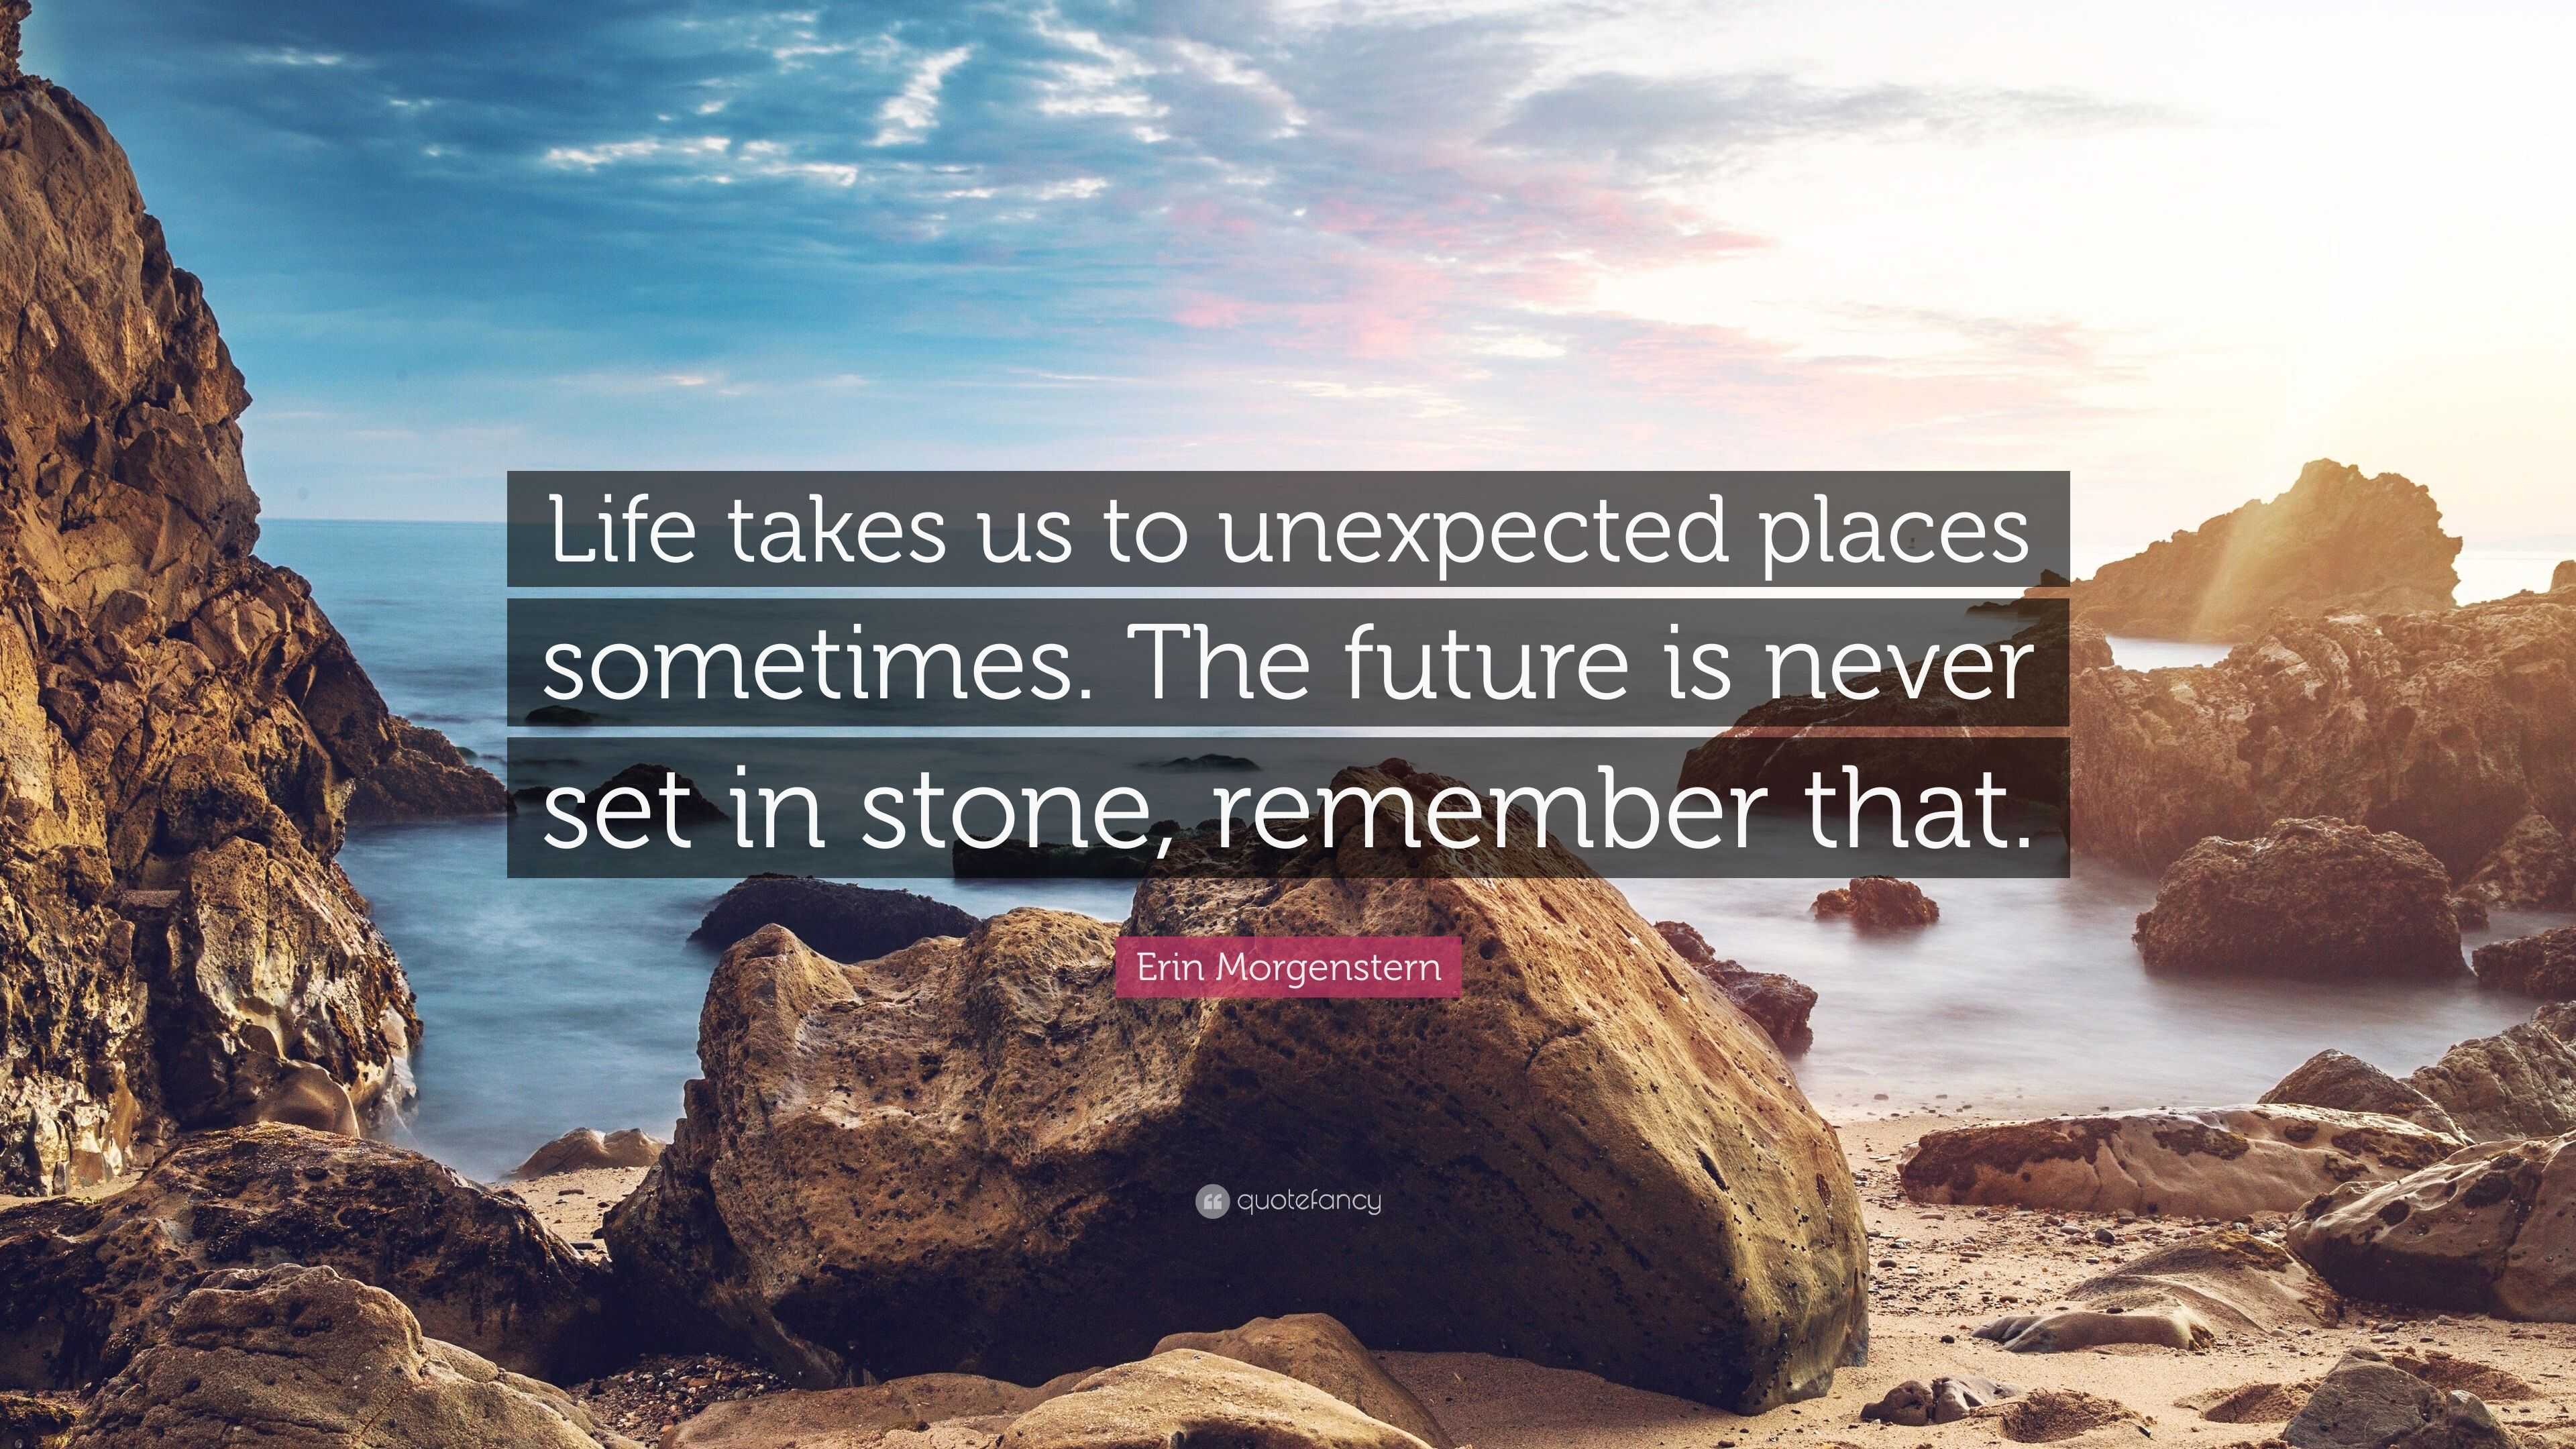 Erin Morgenstern Quote Life Takes Us To Unexpected Places Sometimes The Future Is Never Set In